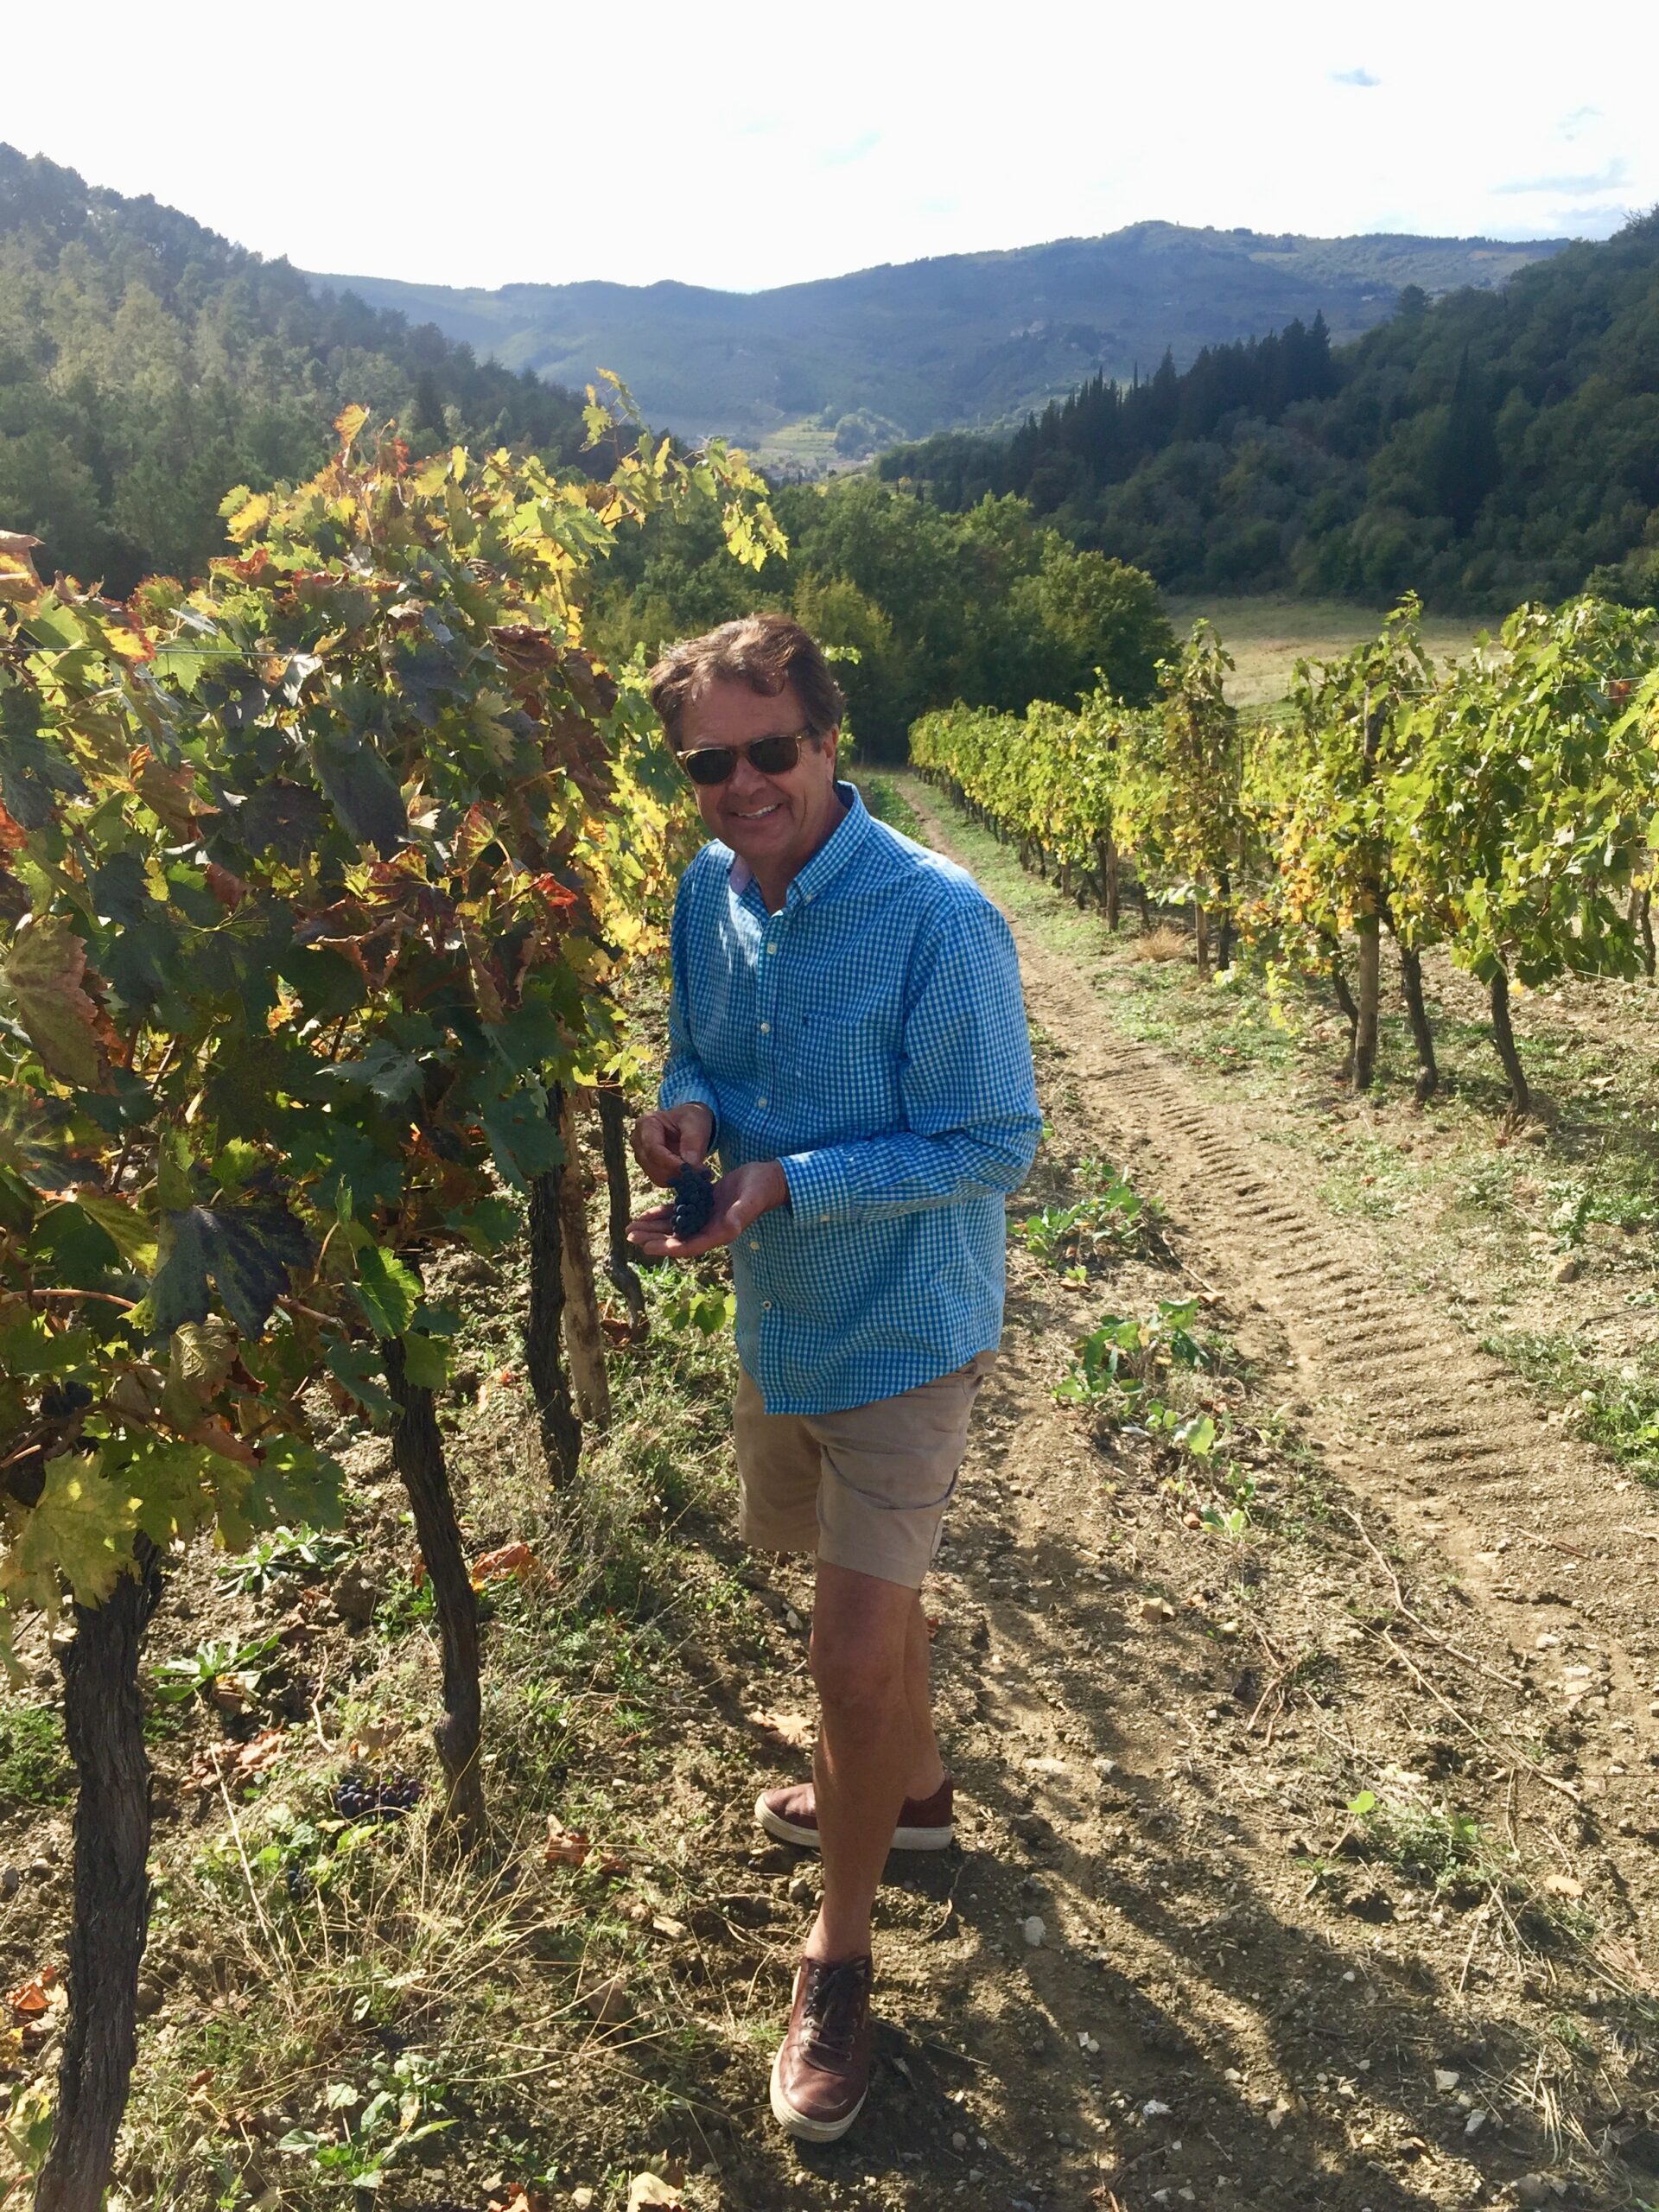 A vineyard is Rick's idea of Living Over the Rainbow